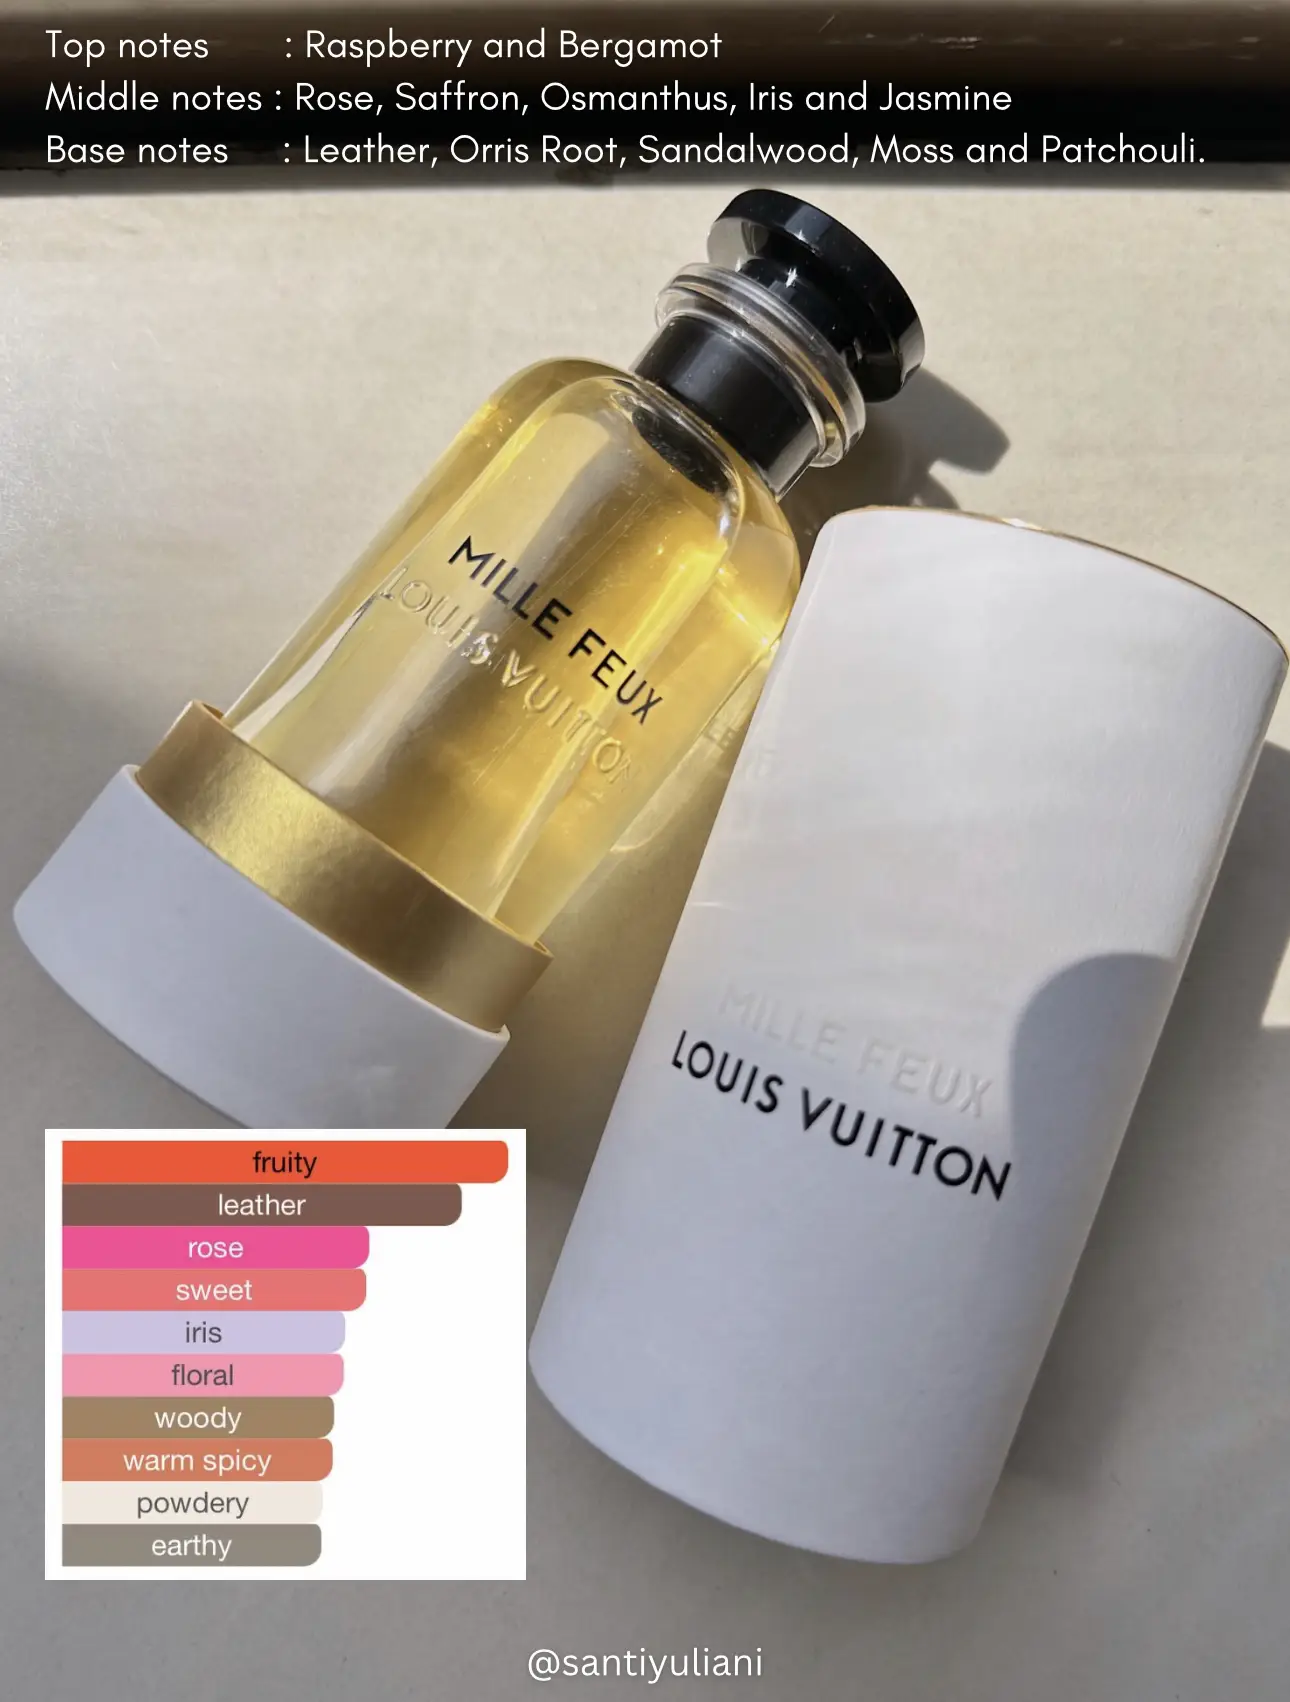 Travel Spray Mille Feux - Collections